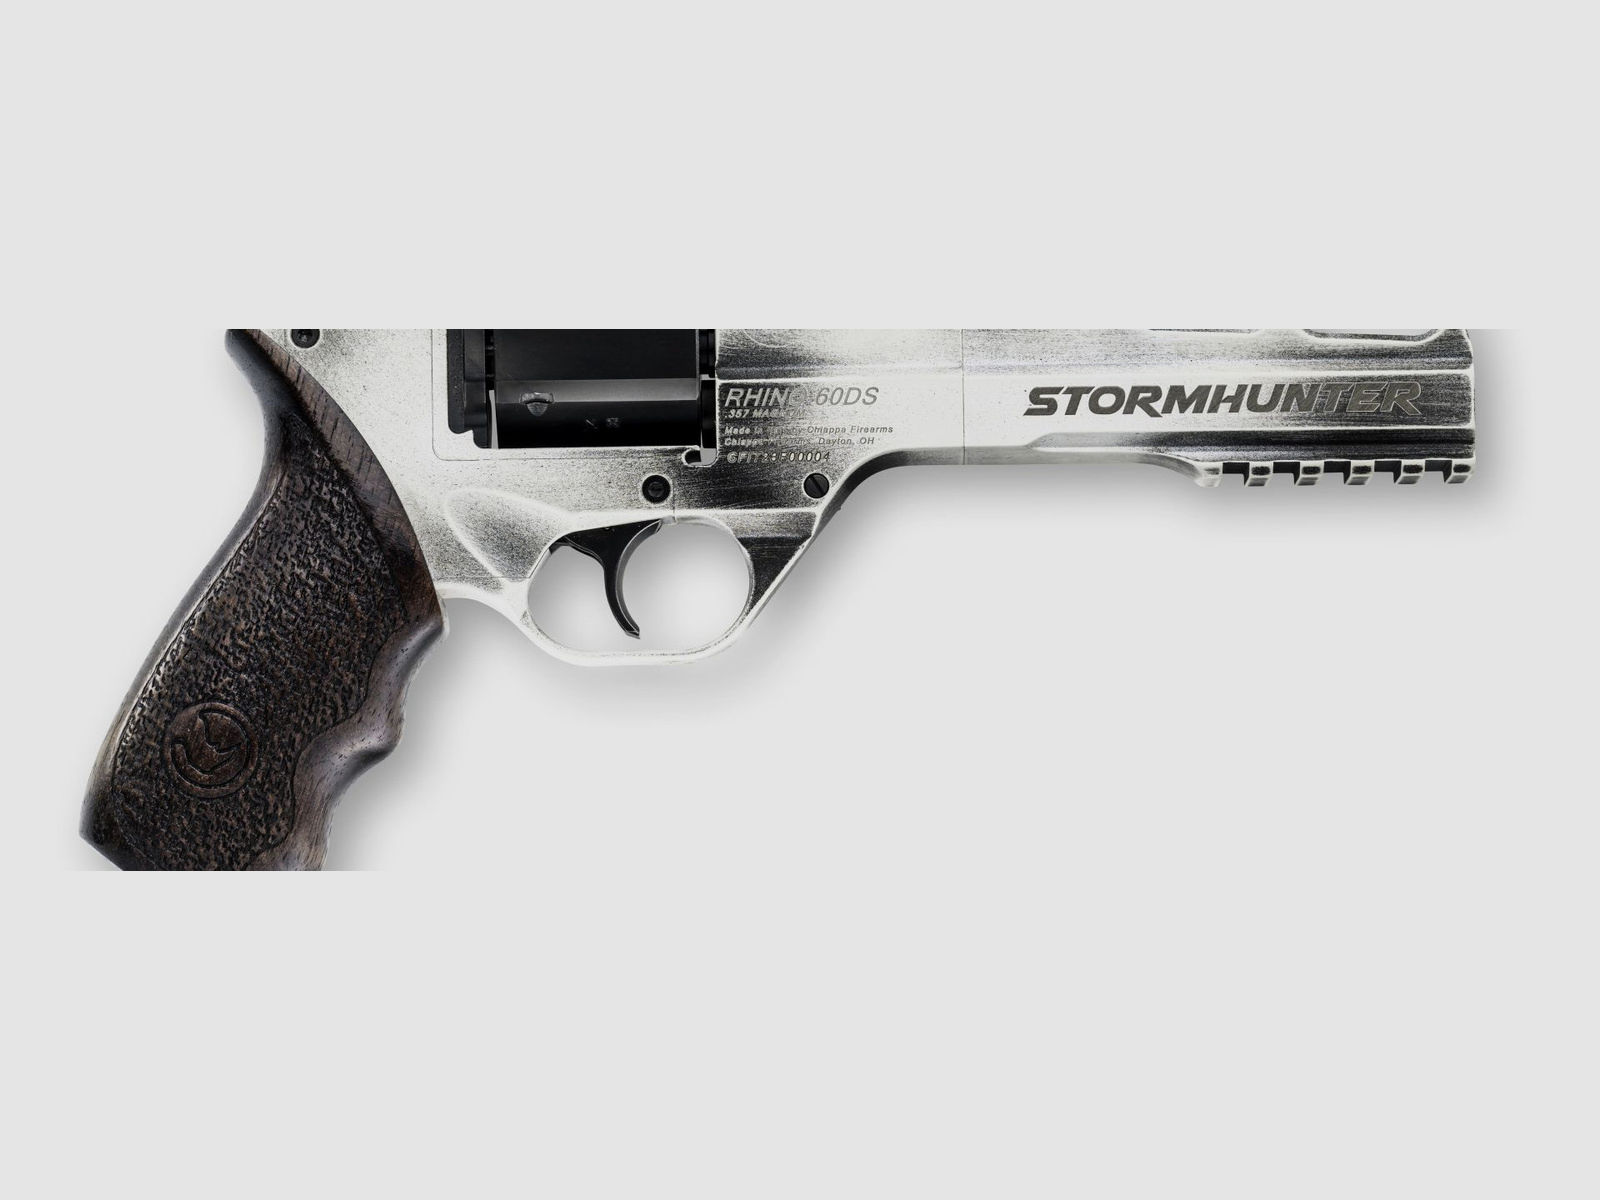 Rhino 60 DS STORMHUNTER .357 Mag. 6''- Special Edition